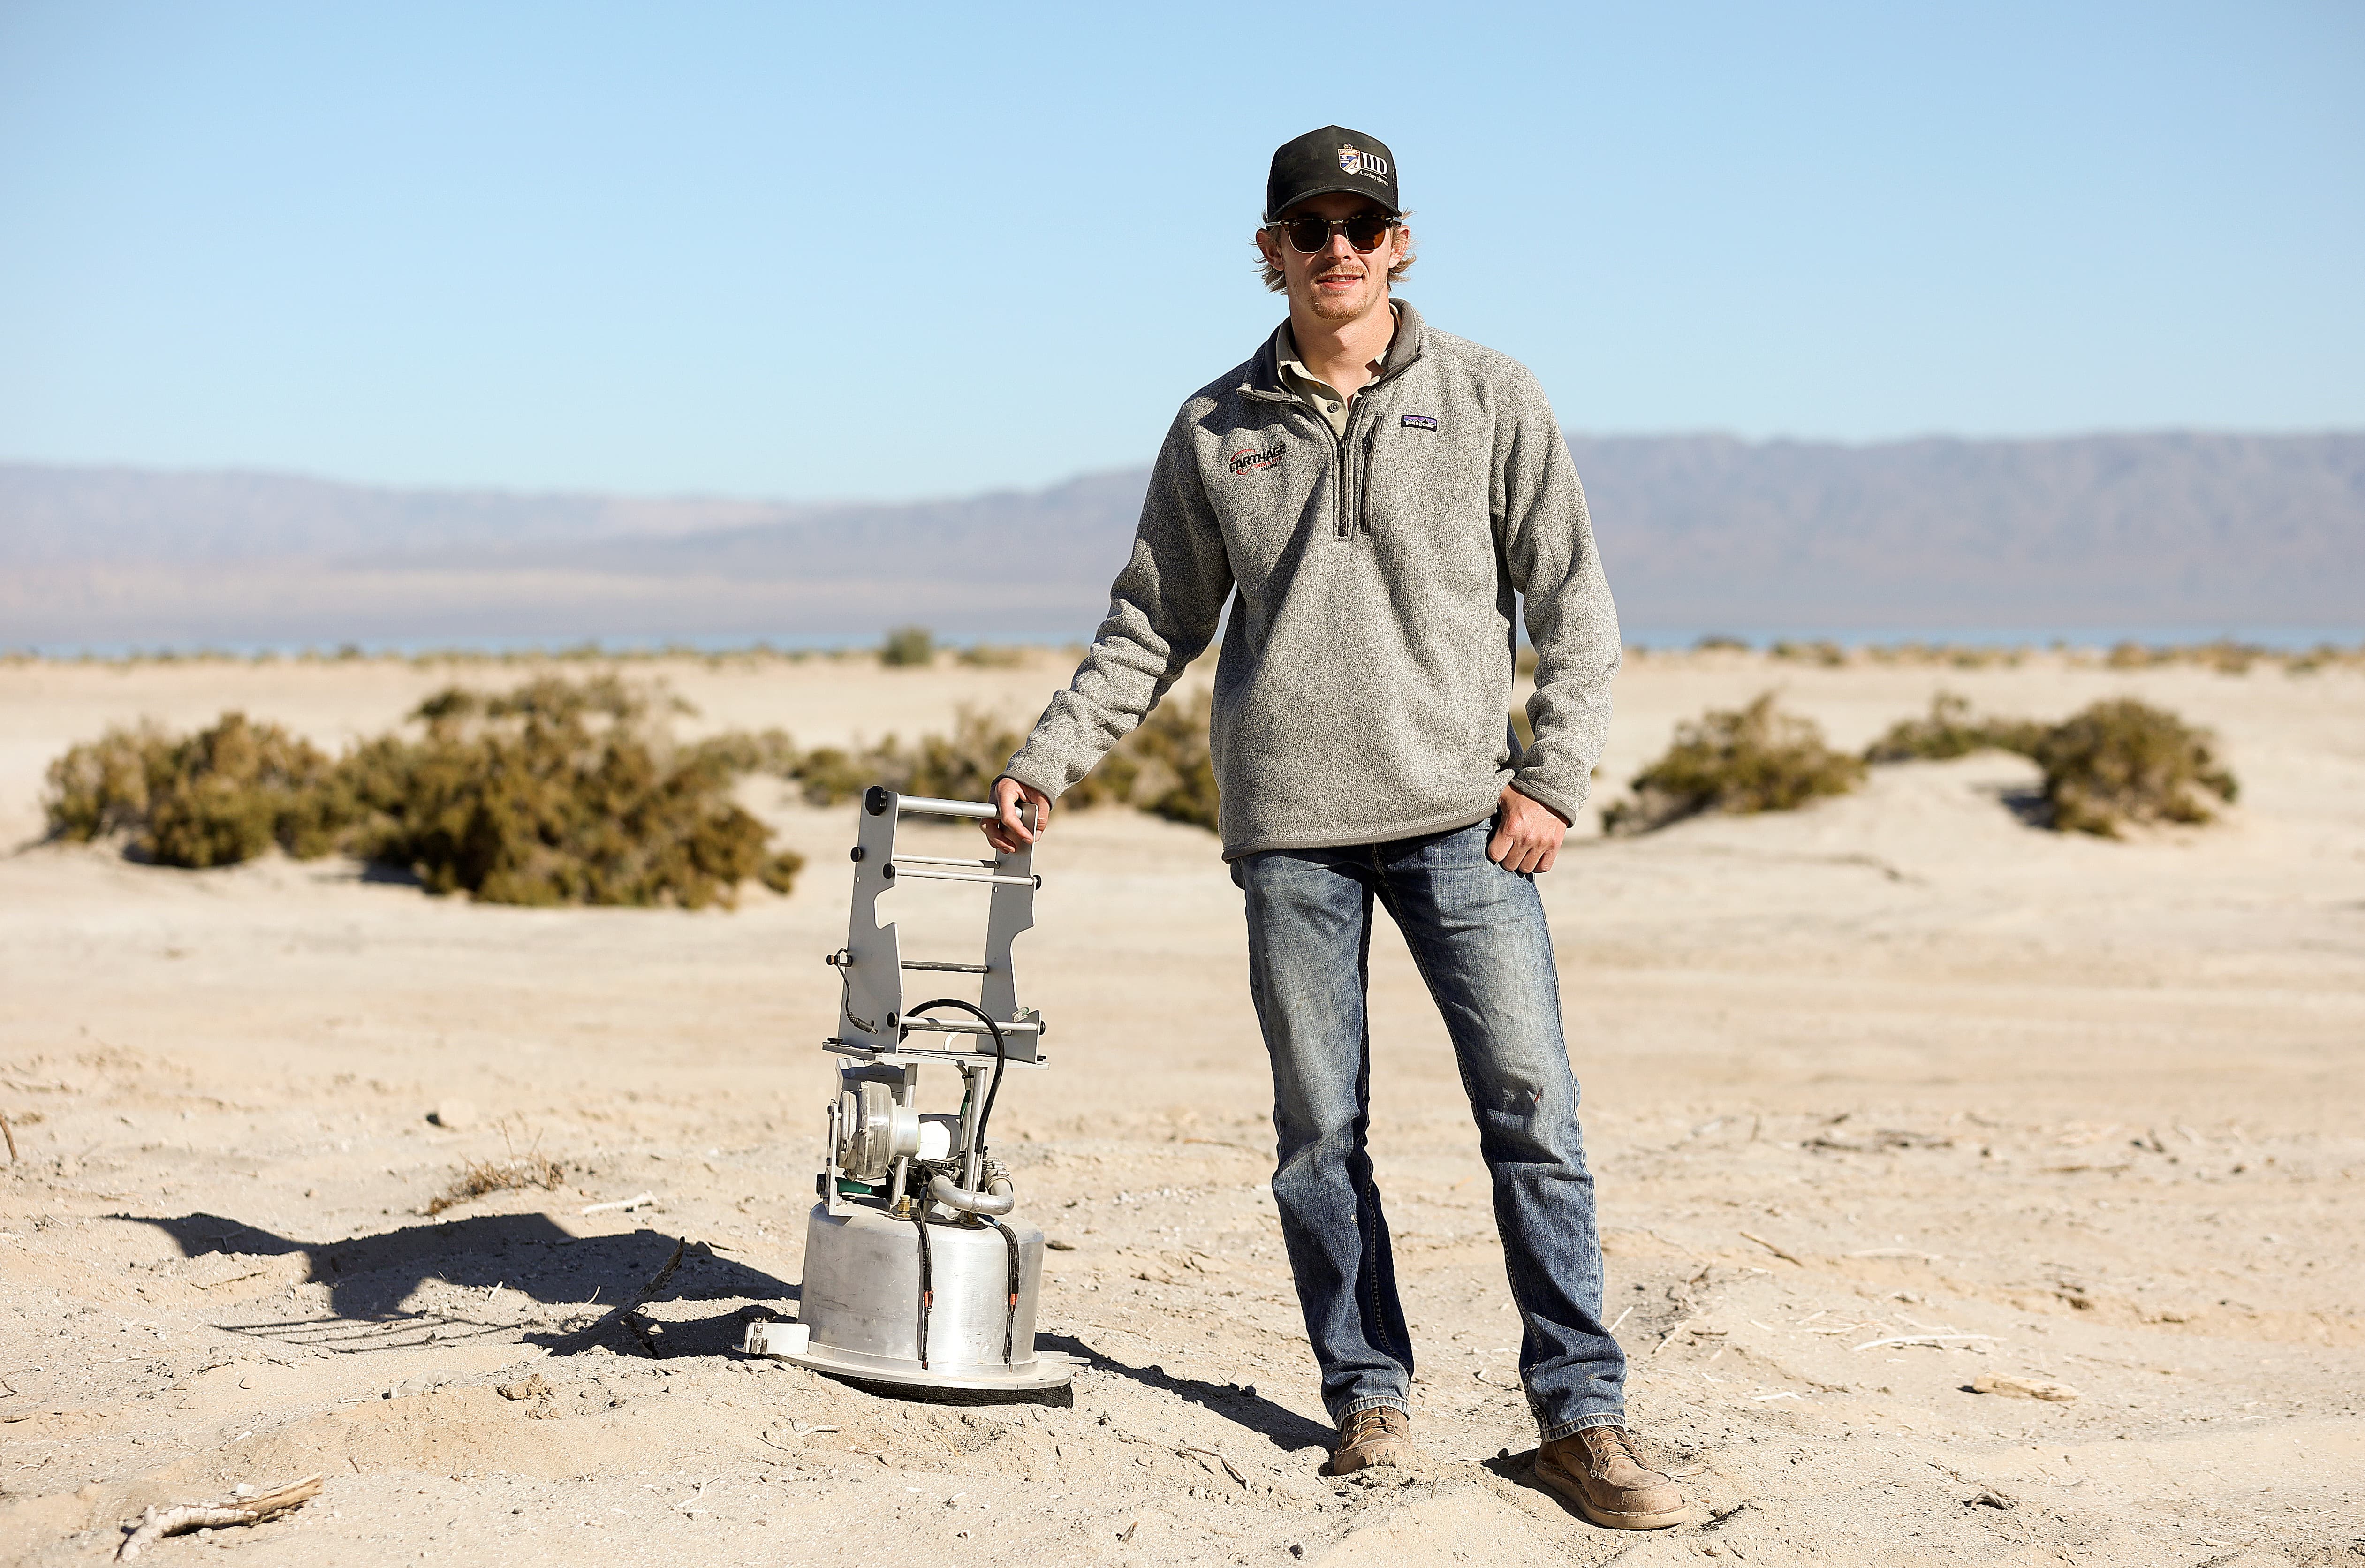 Ross Wilson, Imperial Irrigation District environmental specialist, poses for a portrait with a PI-SWERL, which stands for Portable In-Situ Wind ERosion Lab, in Salton City, Calif., on Wednesday, Dec. 13, 2023.